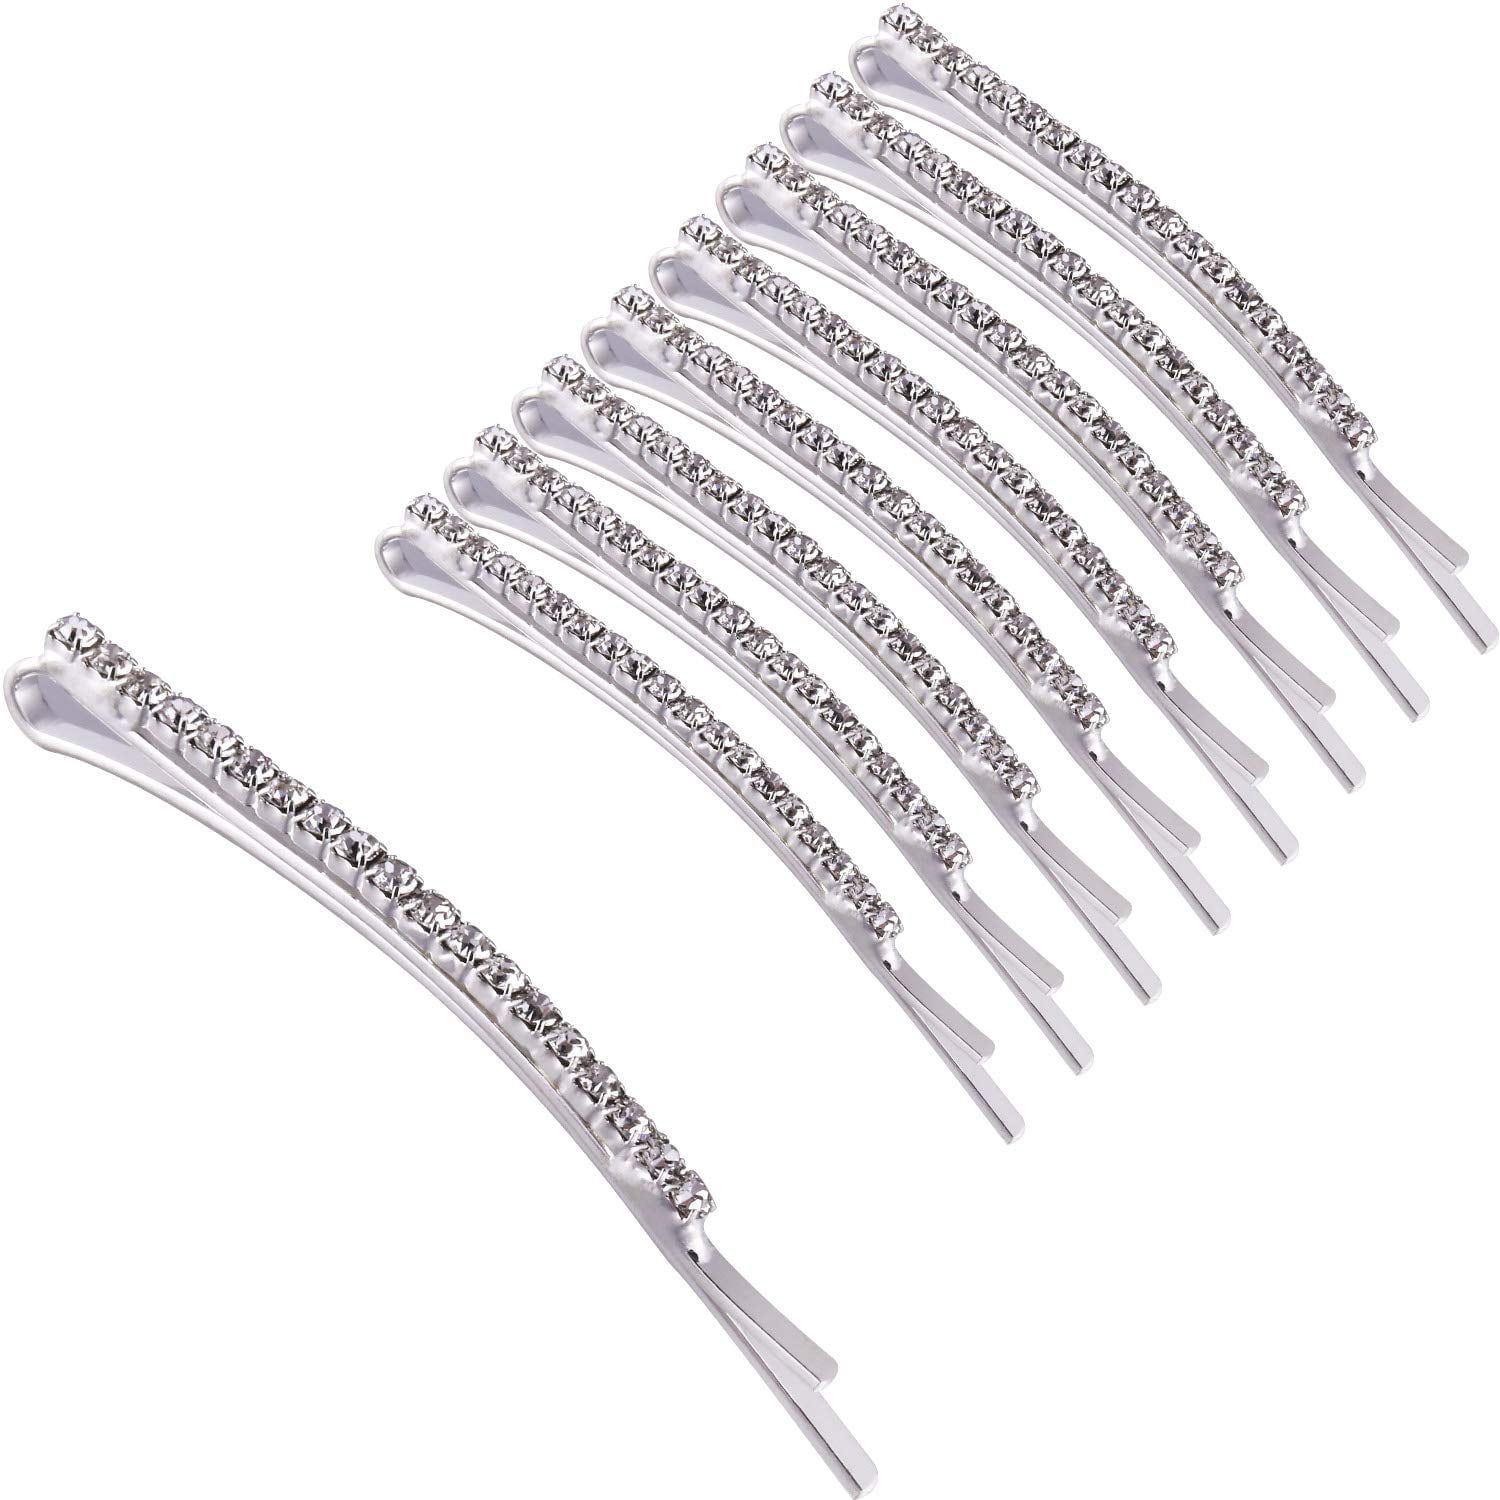 Alloy Crown Leaf Crystal Words Hair Clips Barrettes Hairpin Silver Golden Tone